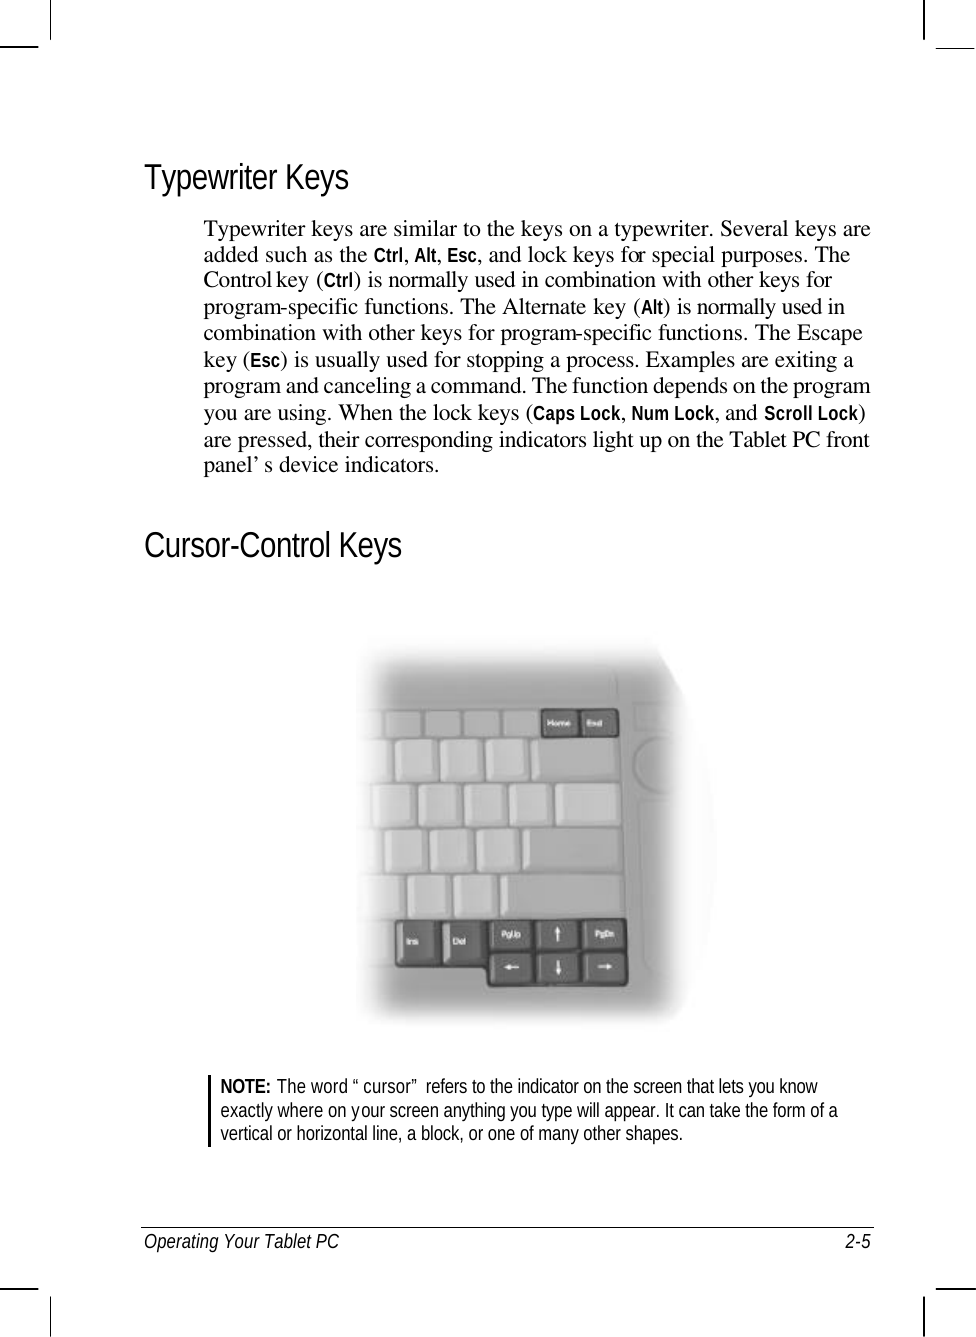  Operating Your Tablet PC 2-5 Typewriter Keys Typewriter keys are similar to the keys on a typewriter. Several keys are added such as the Ctrl, Alt, Esc, and lock keys for special purposes. The Control key (Ctrl) is normally used in combination with other keys for program-specific functions. The Alternate key (Alt) is normally used in combination with other keys for program-specific functions. The Escape key (Esc) is usually used for stopping a process. Examples are exiting a program and canceling a command. The function depends on the program you are using. When the lock keys (Caps Lock, Num Lock, and Scroll Lock) are pressed, their corresponding indicators light up on the Tablet PC front panel’s device indicators. Cursor-Control Keys  NOTE: The word “cursor” refers to the indicator on the screen that lets you know exactly where on your screen anything you type will appear. It can take the form of a vertical or horizontal line, a block, or one of many other shapes.   